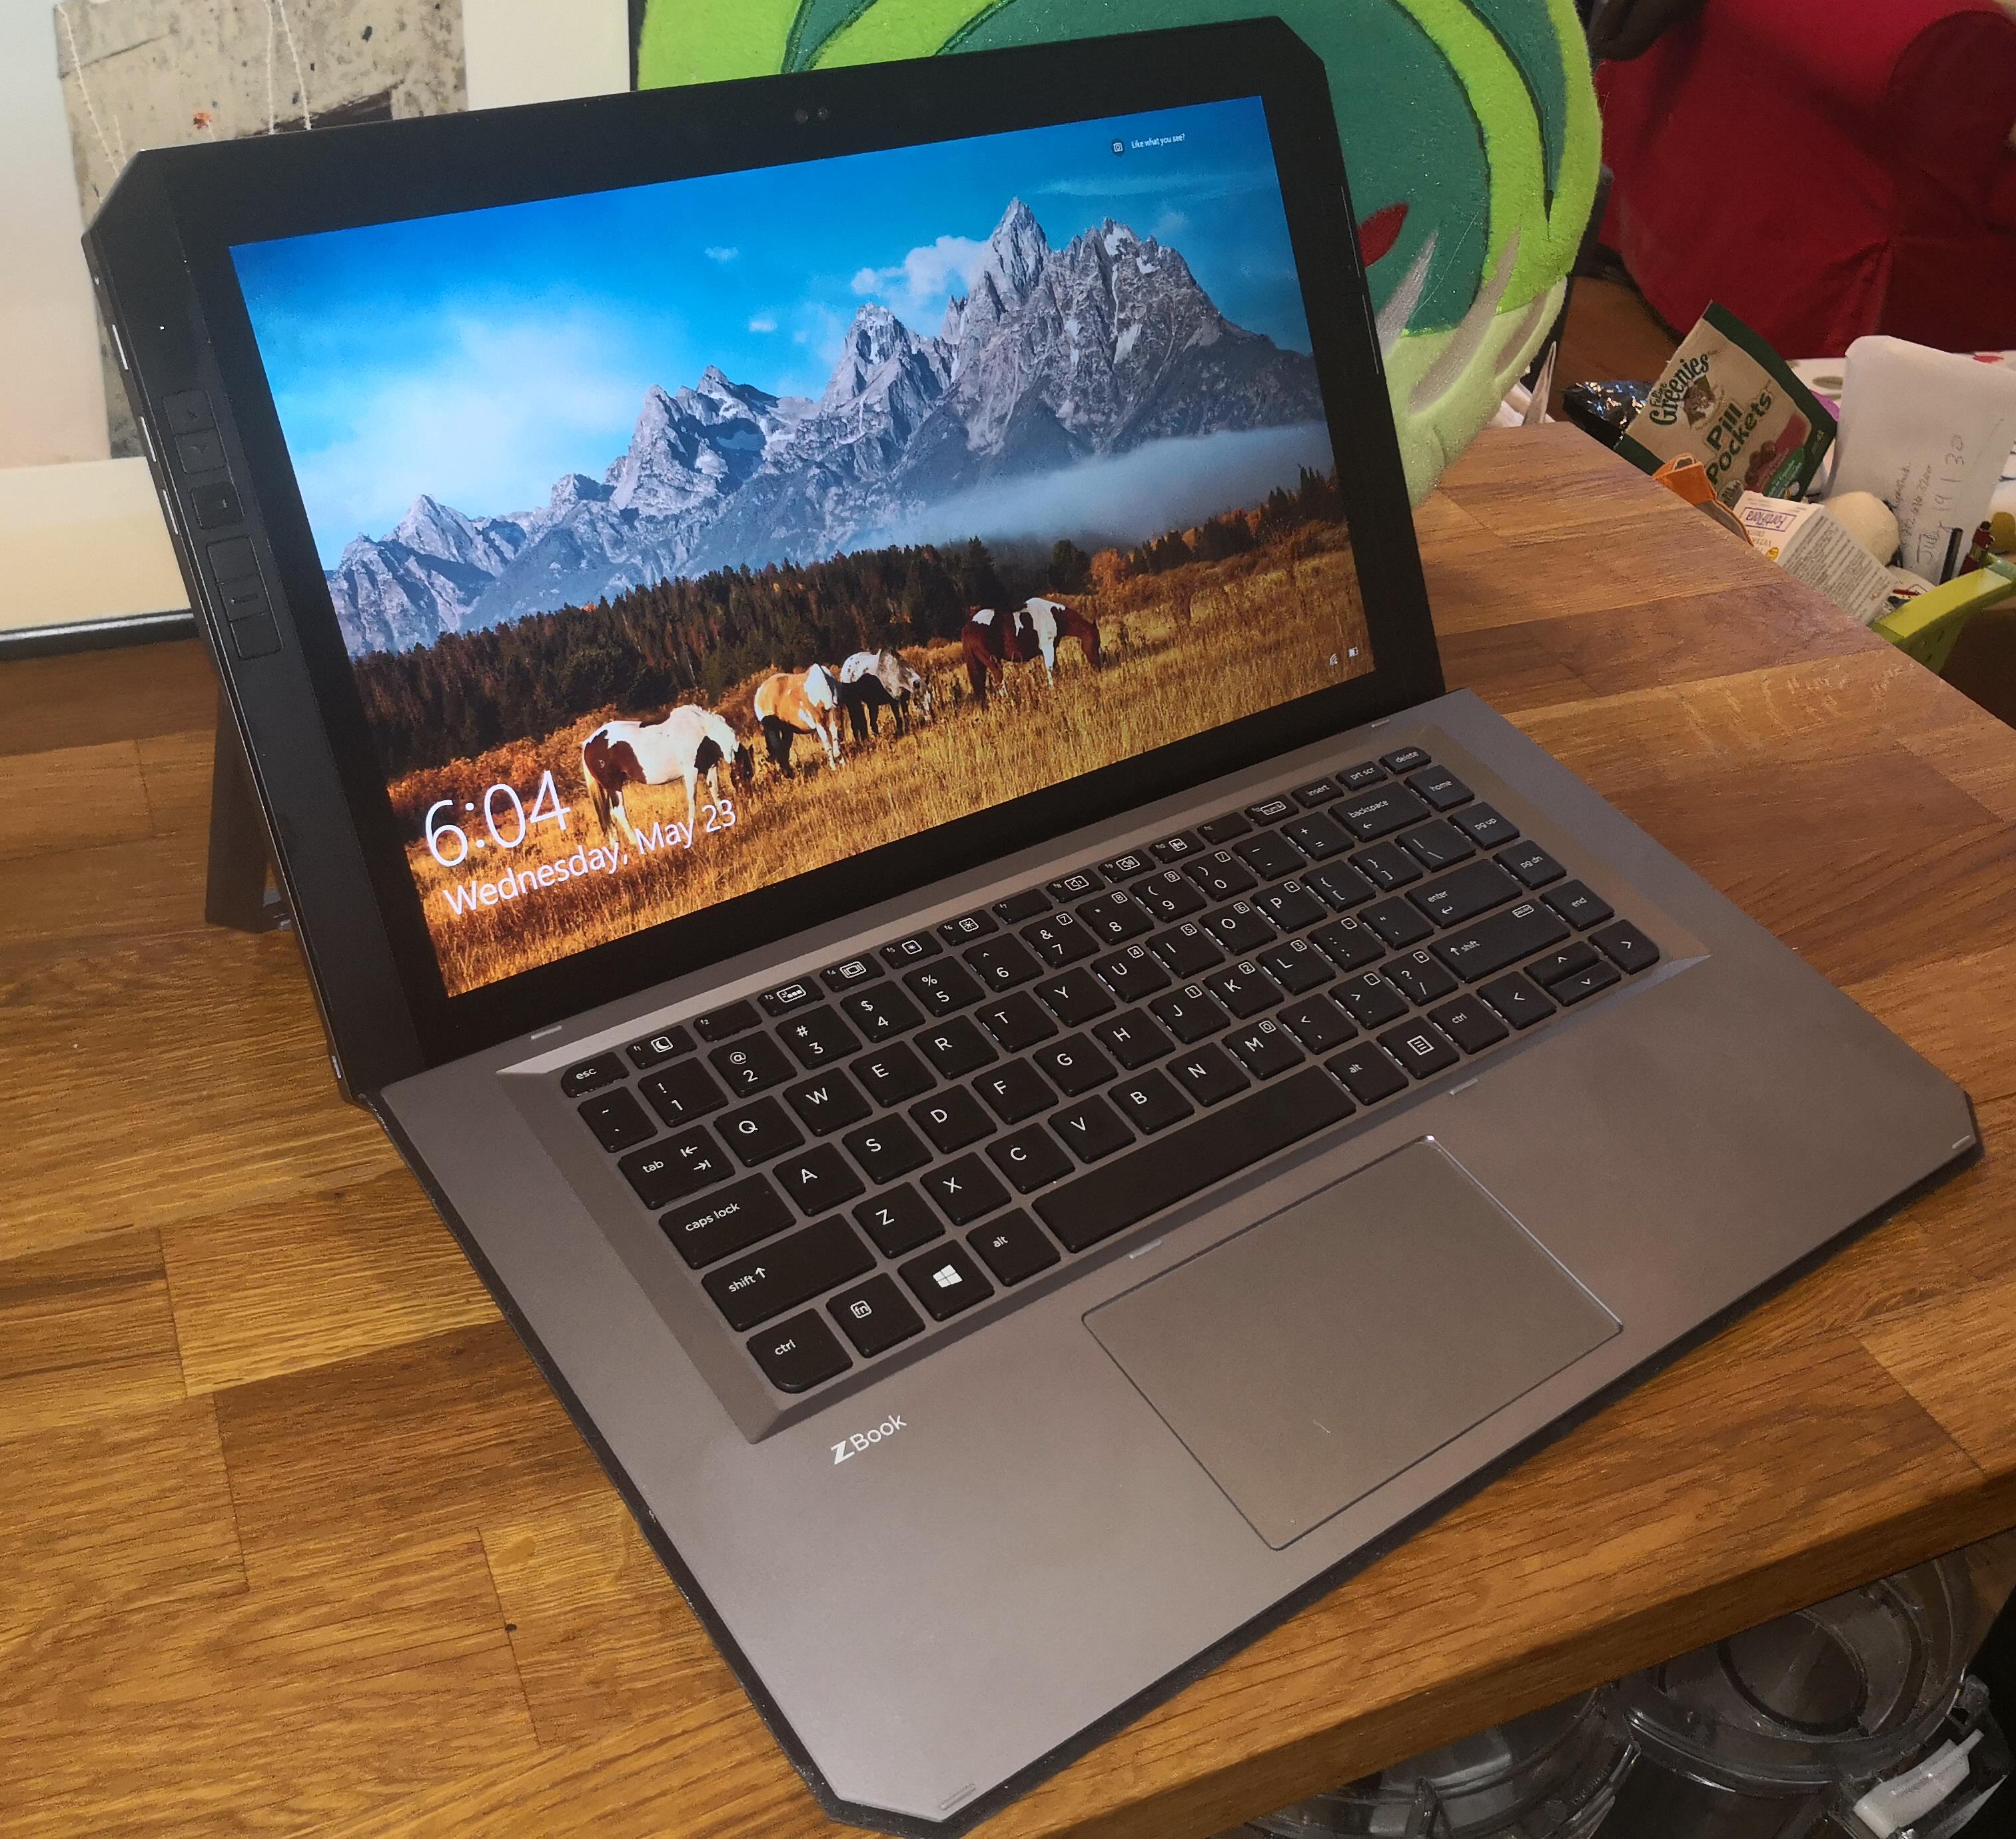 HP's ZBook x2: It's powerful, it's specialized, and it's very 